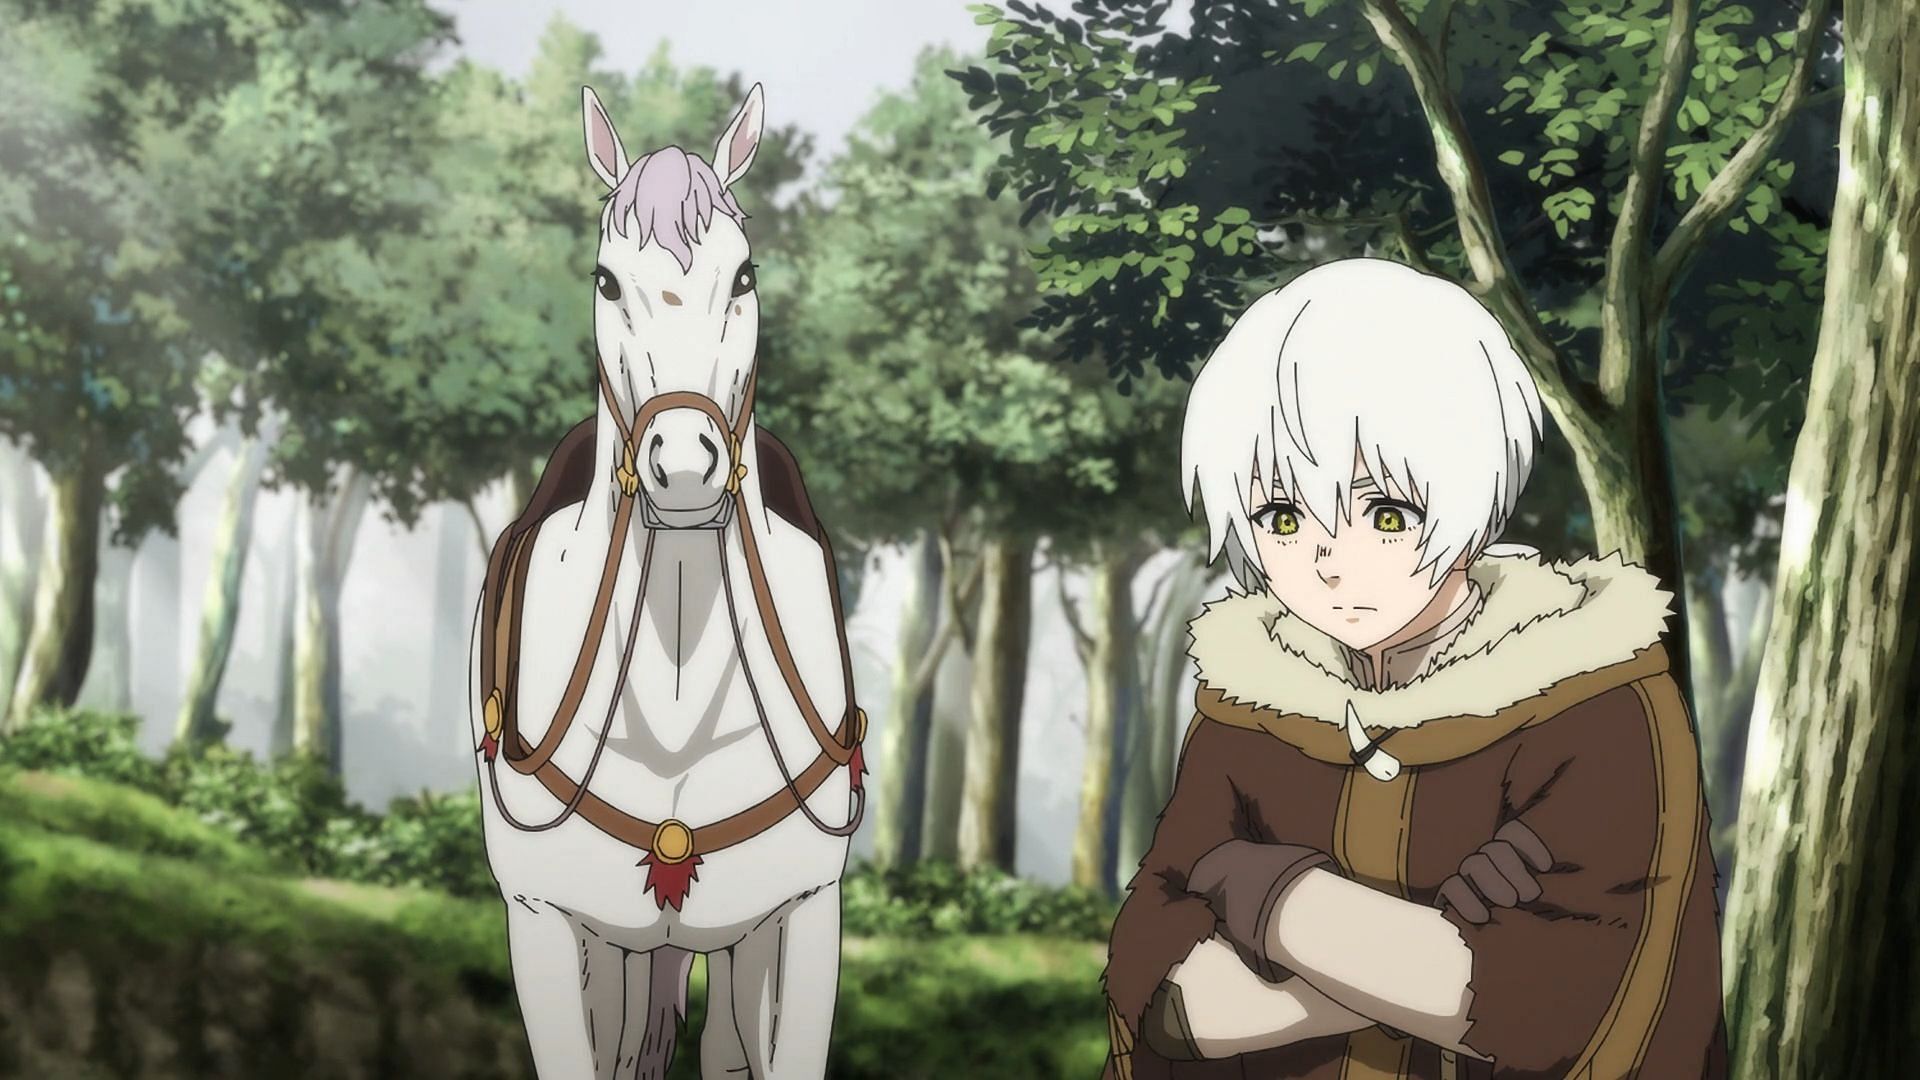 Fushi and Horse as seen in To Your Eternity season 2, episode 9 (Image via Studio Drive)